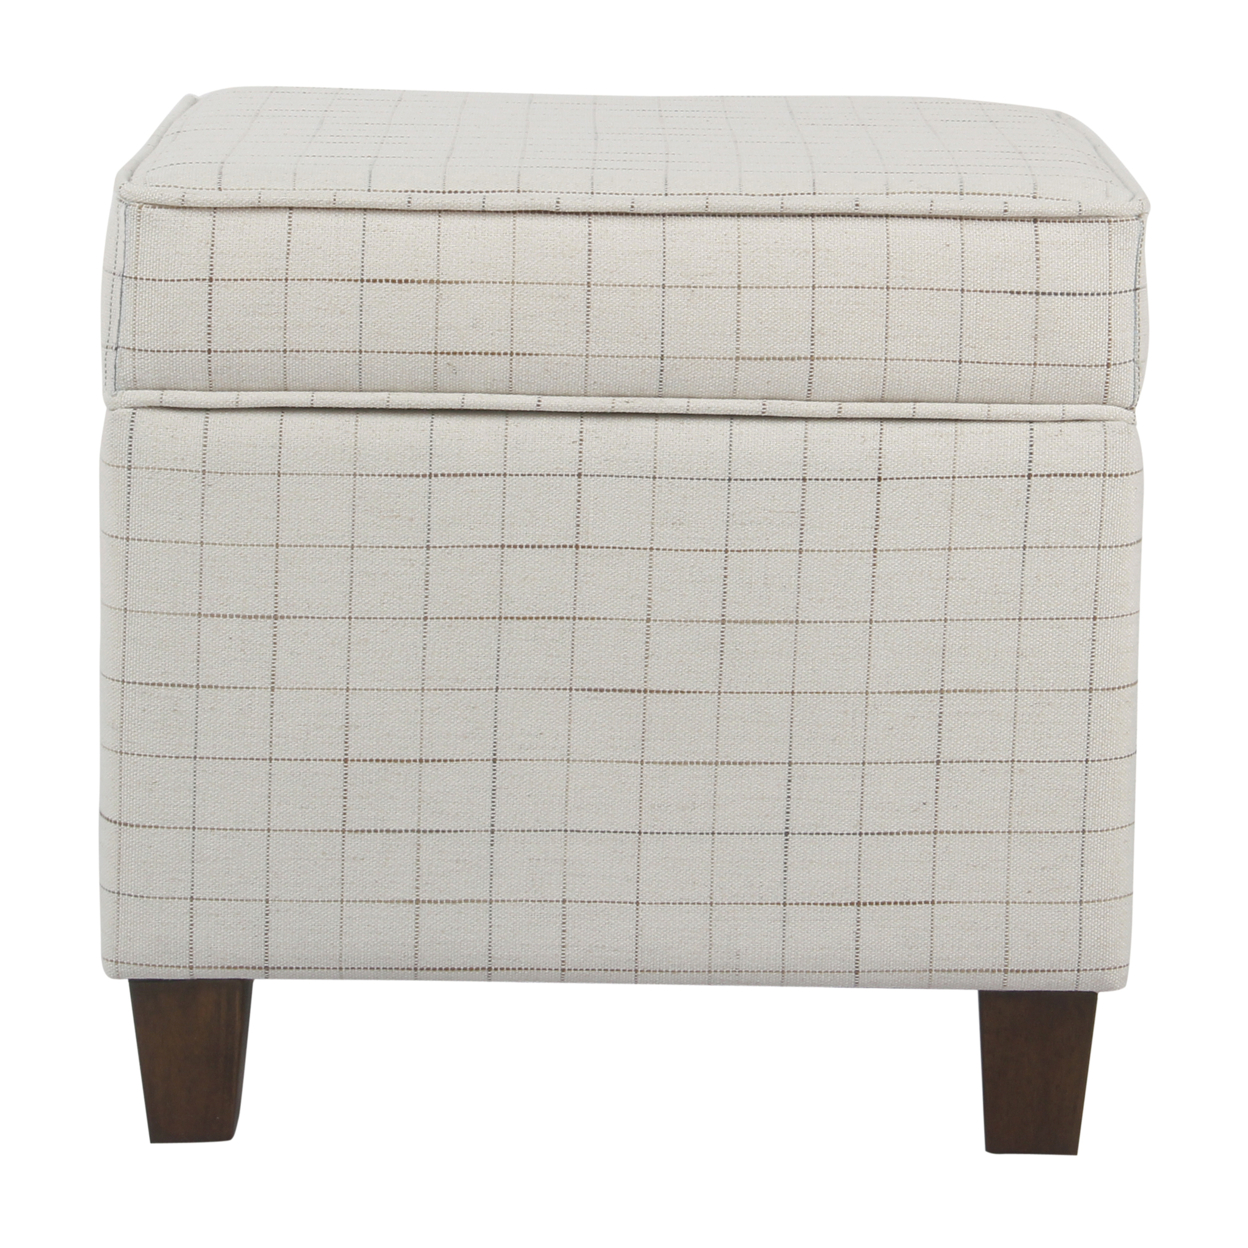 Wooden Square Ottoman With Grid Patterned Fabric Upholstery And Hidden Storage, Beige And Brown- Saltoro Sherpi